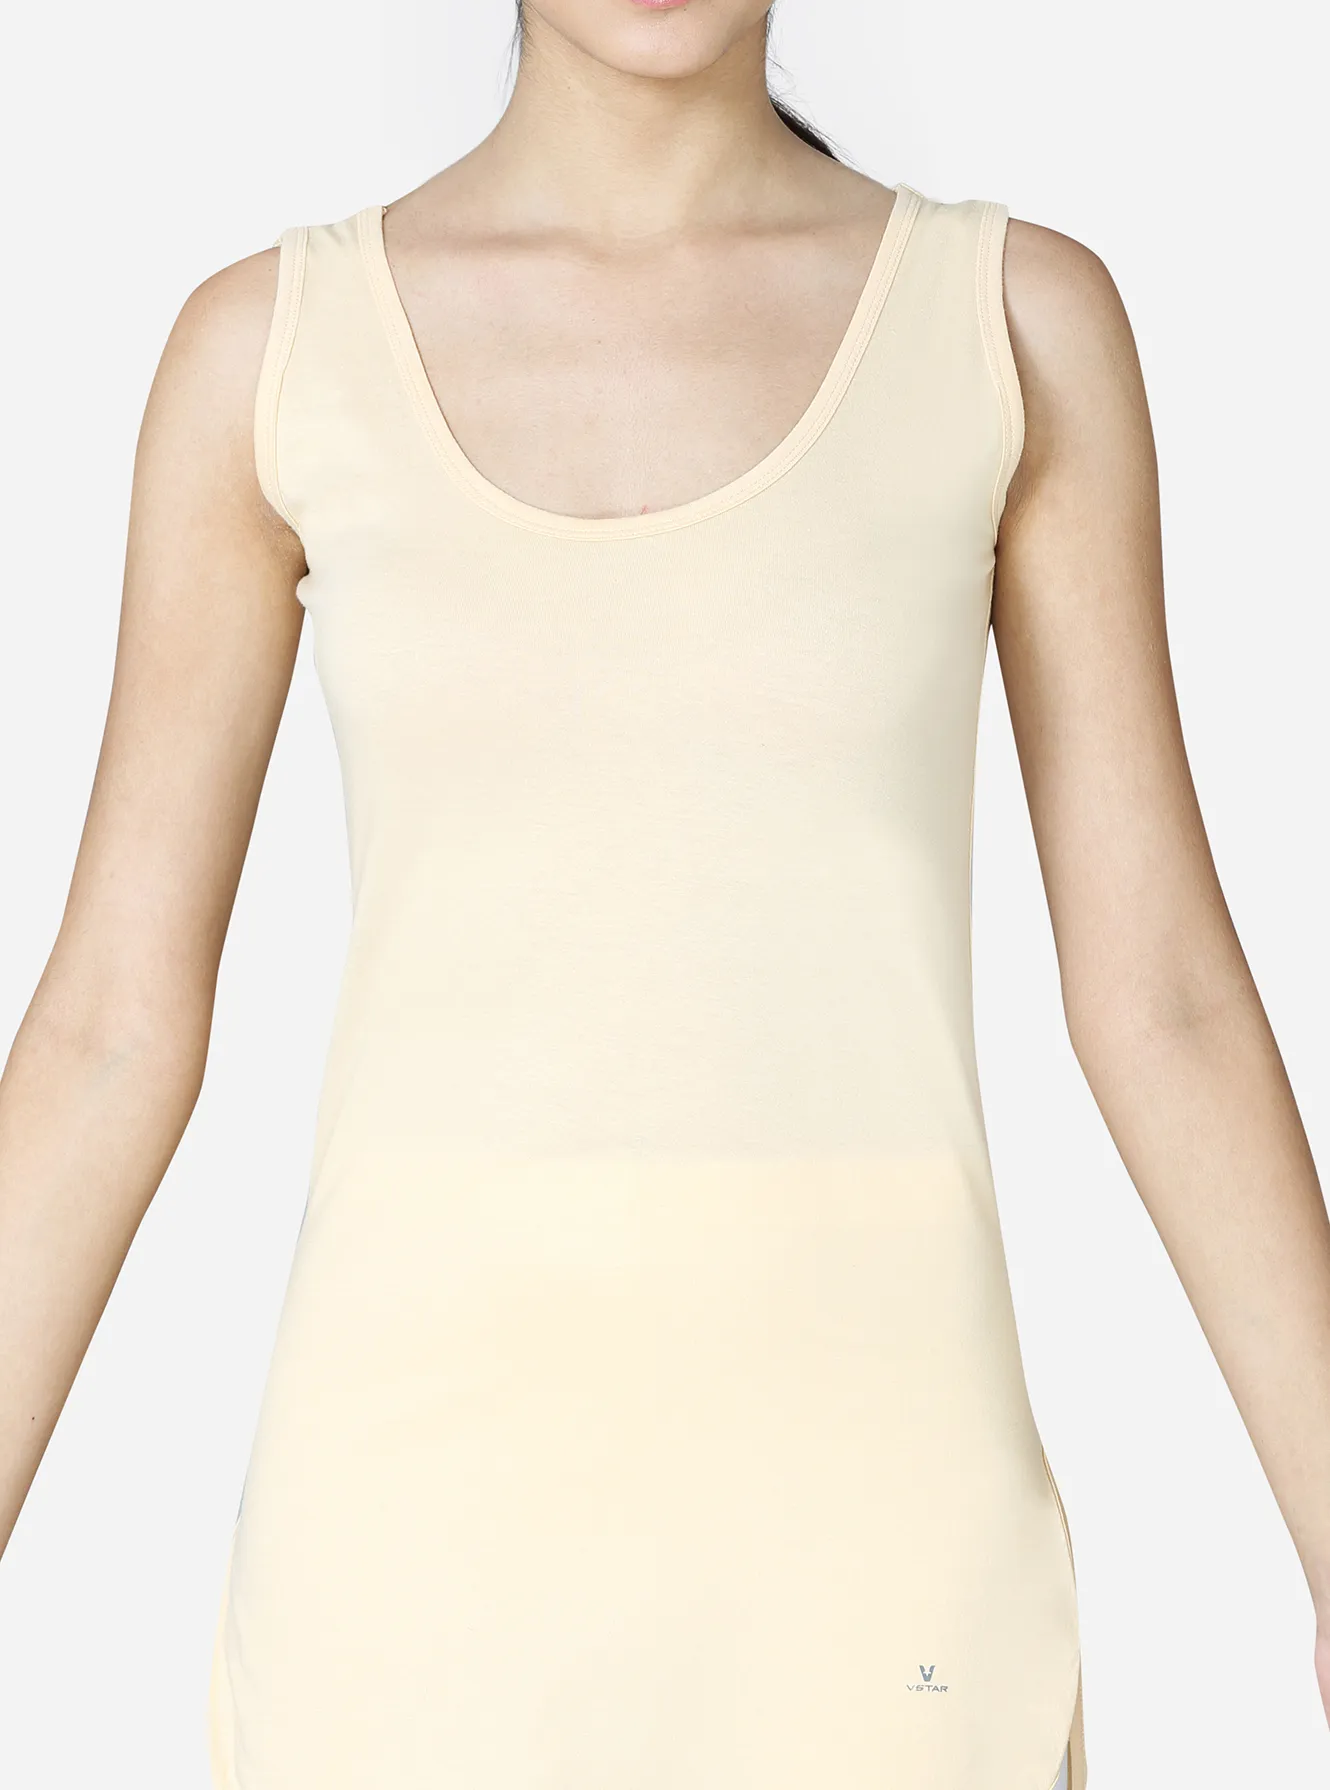 H HIAMIGOS Women's Cotton Tank Top with Built-in India